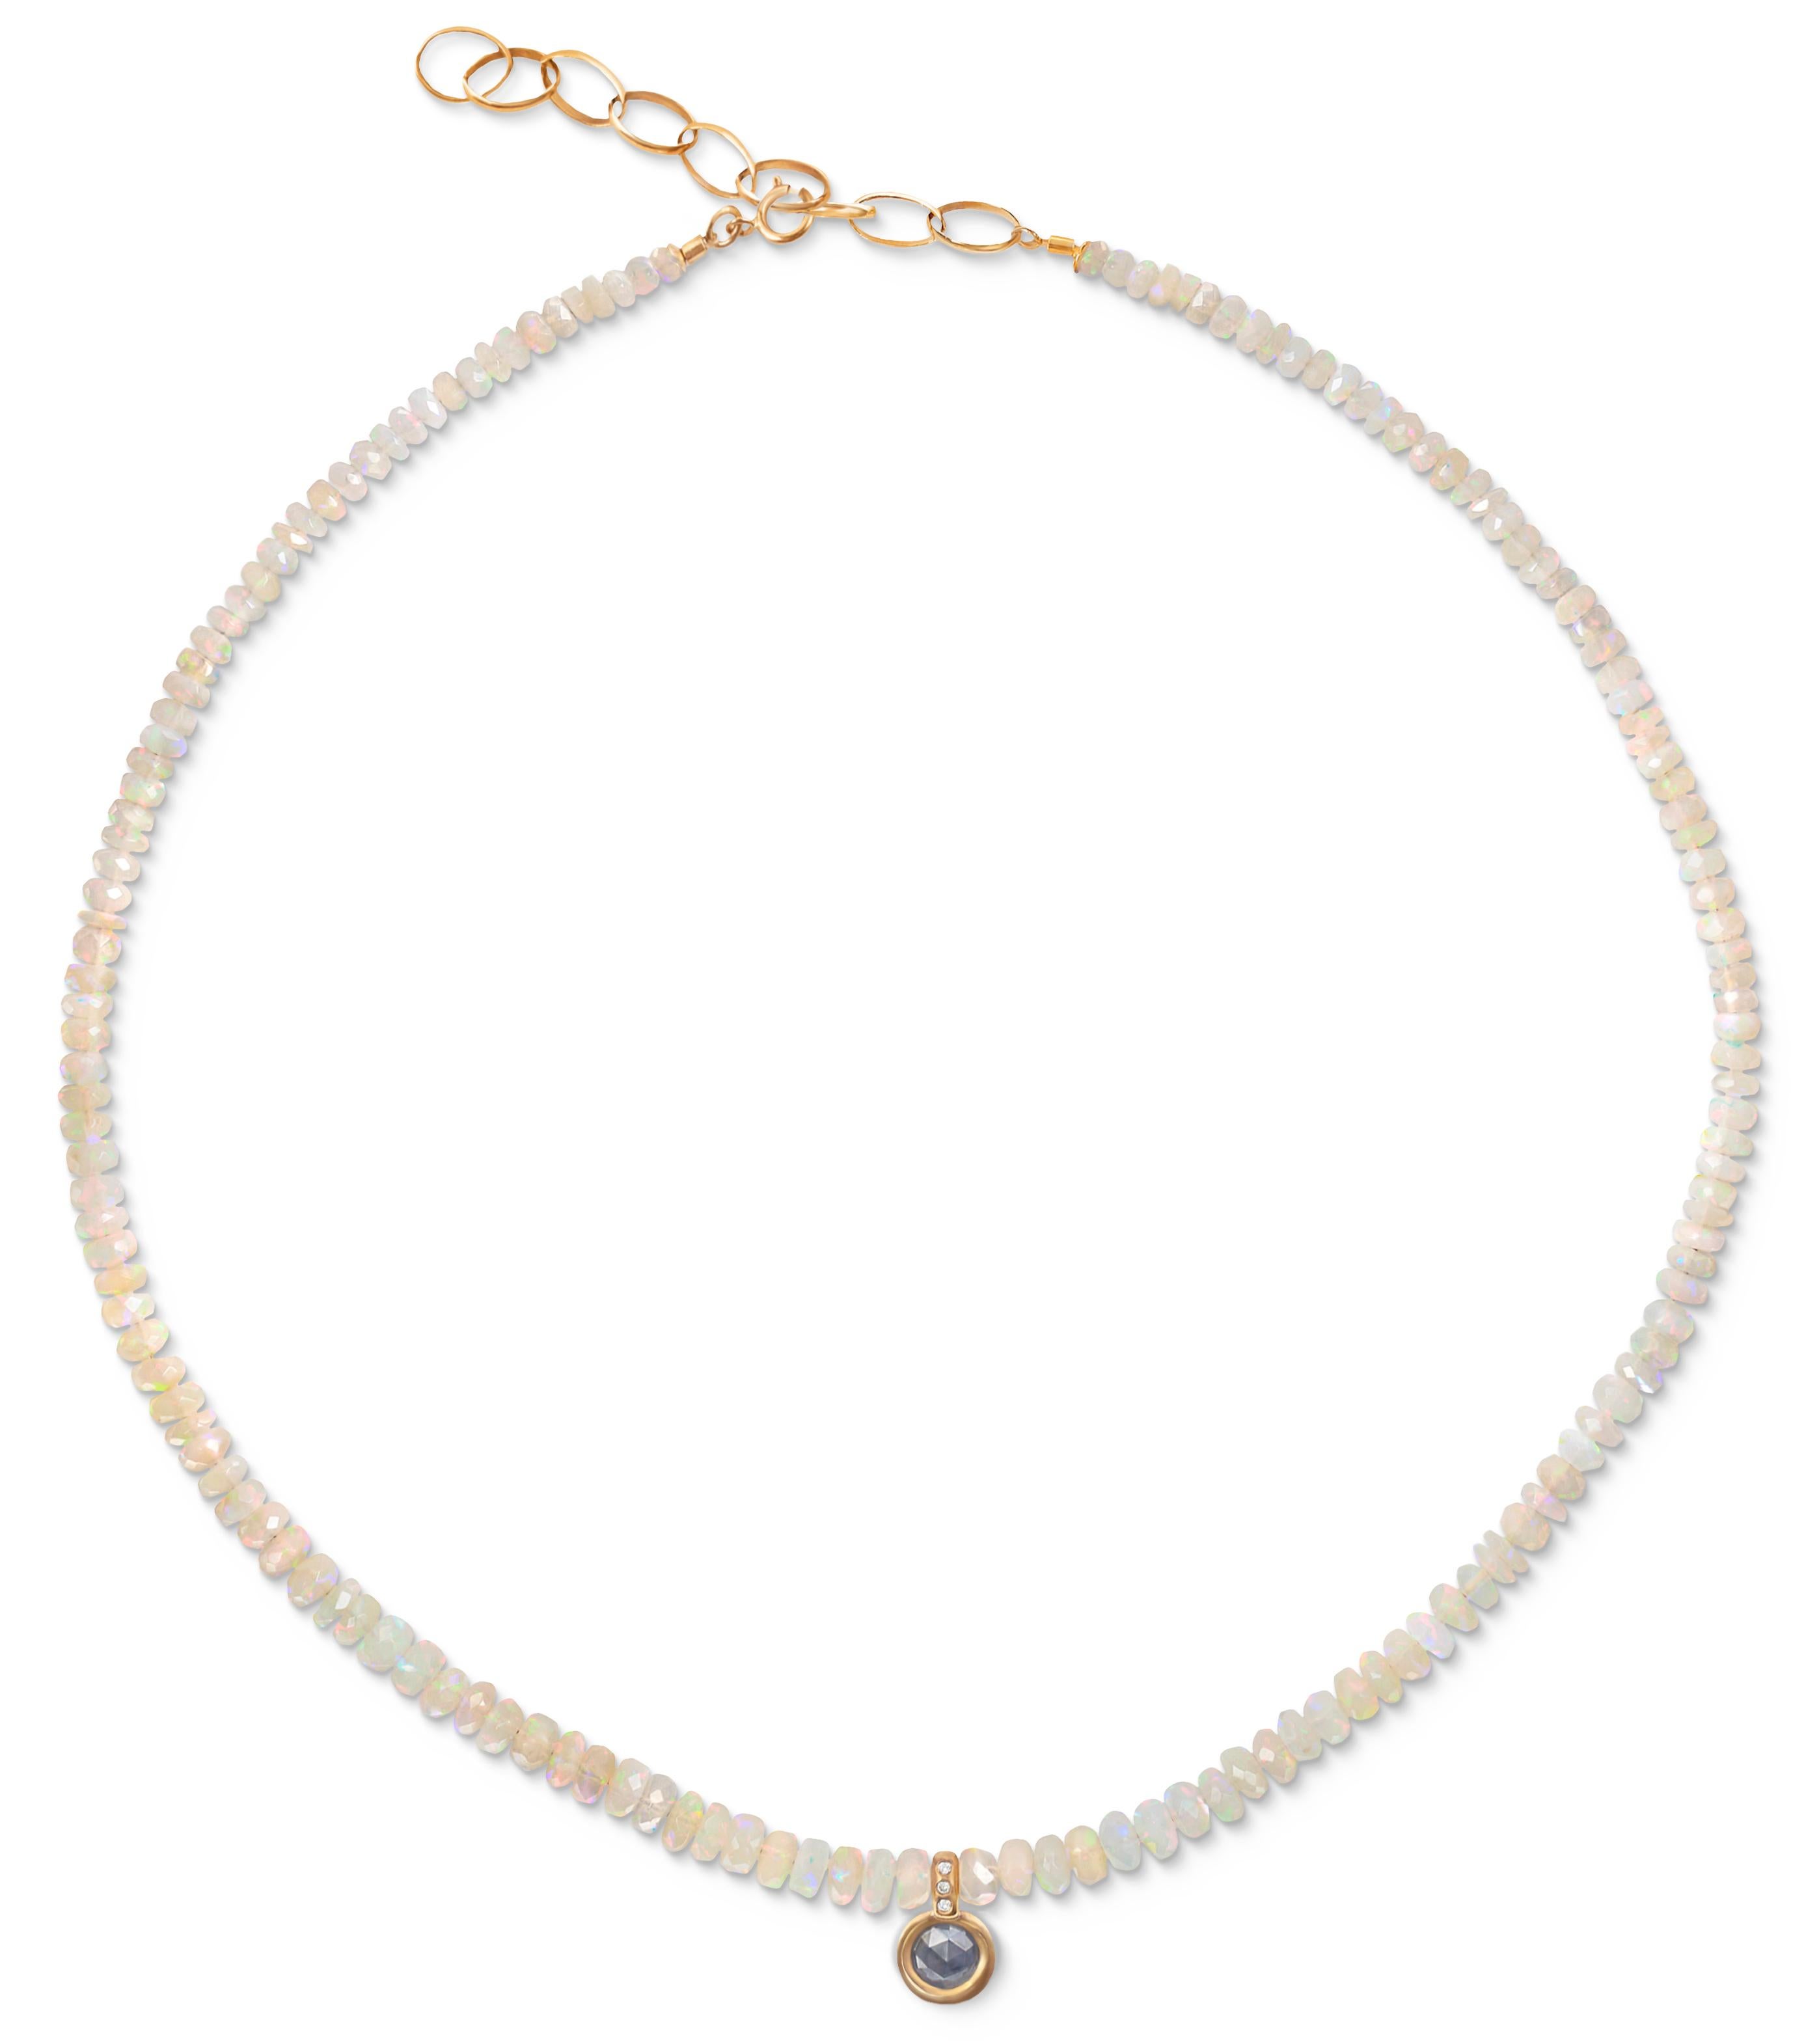 Women's or Men's Rustic Faceted Opal Beaded Necklace with Grey Diamond and 18k Gold Pendant